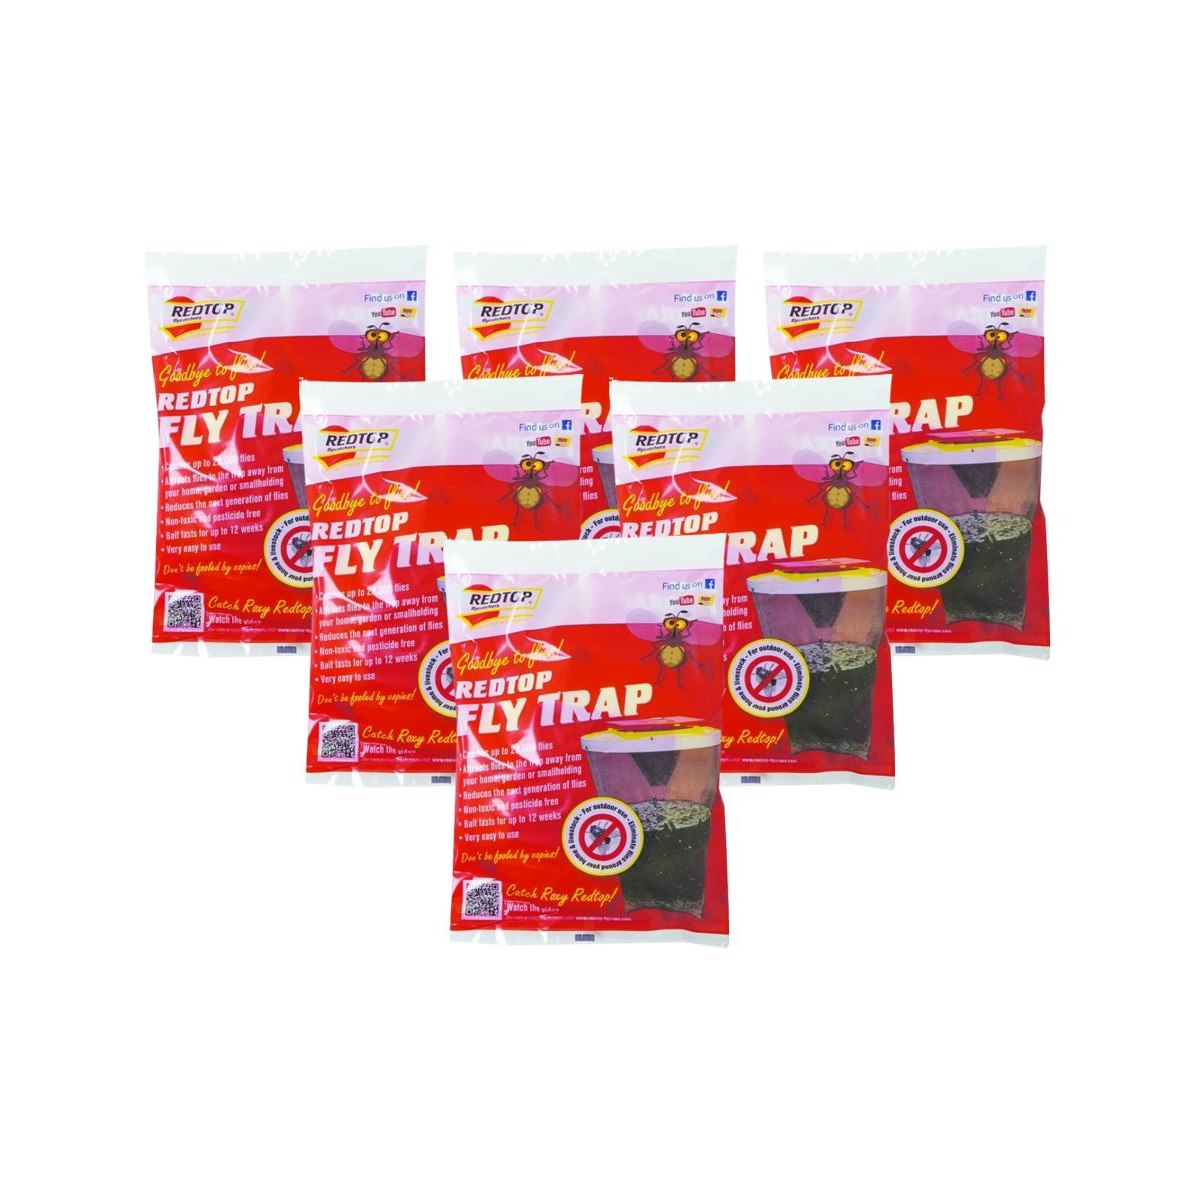 Case of 6 x Red Top Fly Trap